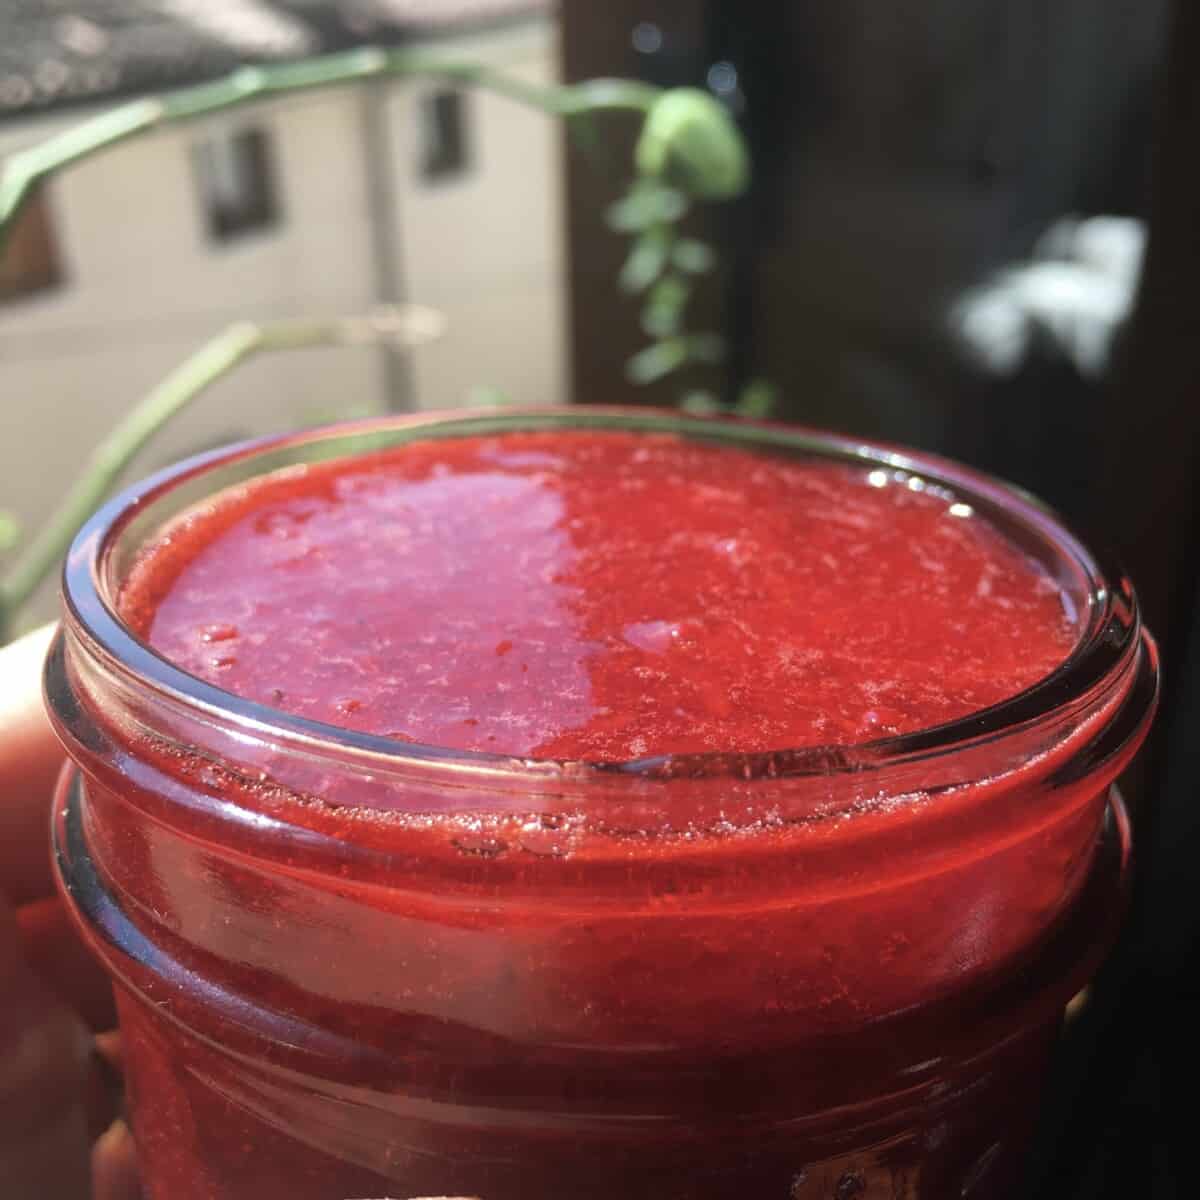 strawberry sauce in a small Mason jar looking super bright red with a view out of the window